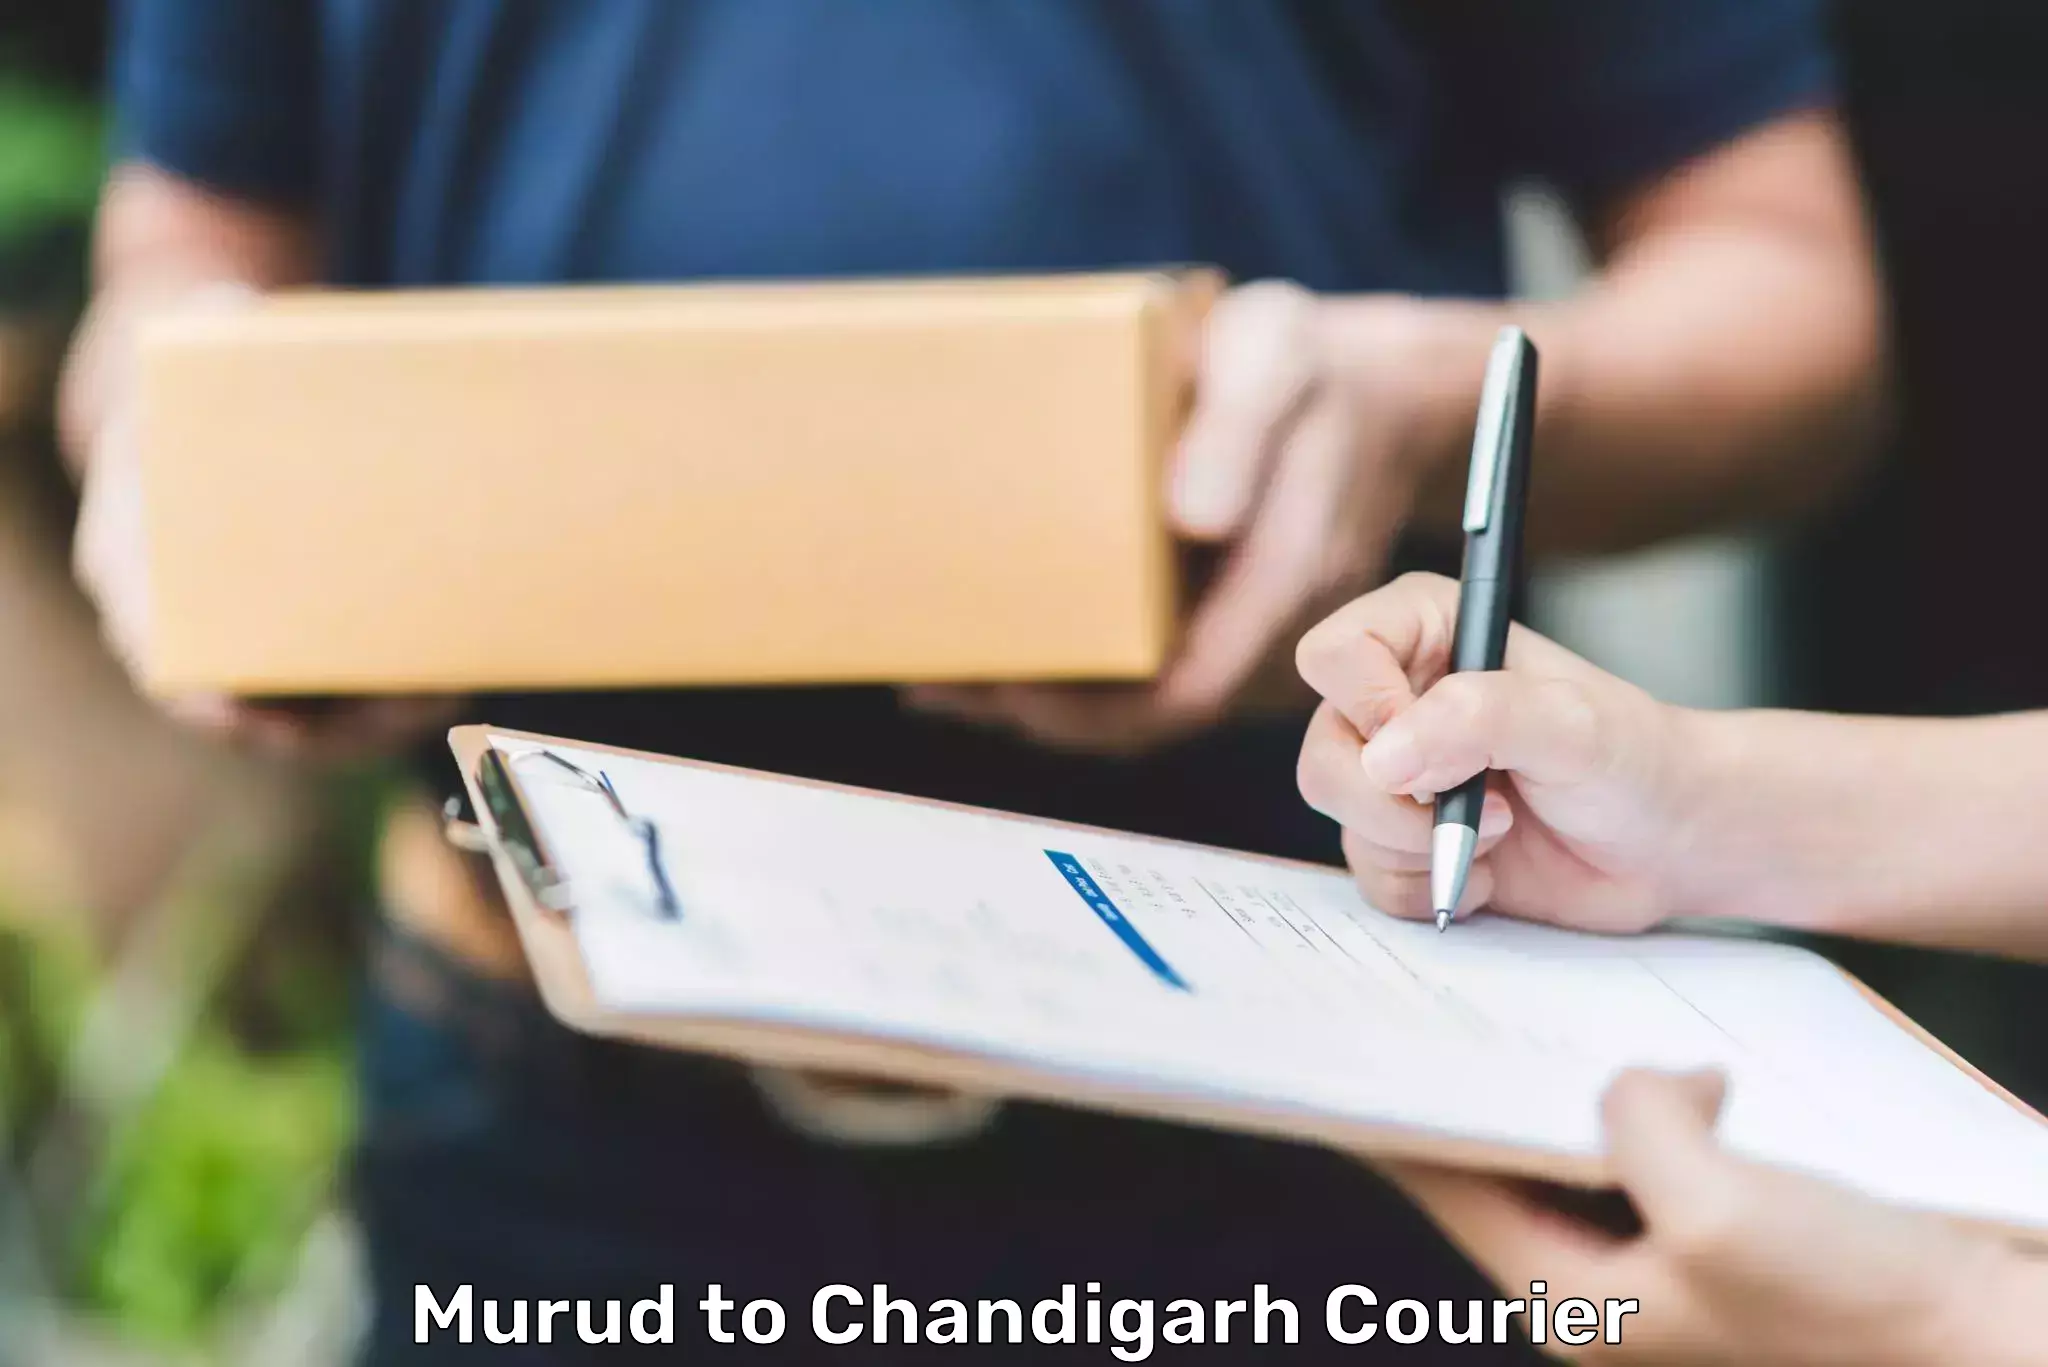 Parcel handling and care Murud to Chandigarh